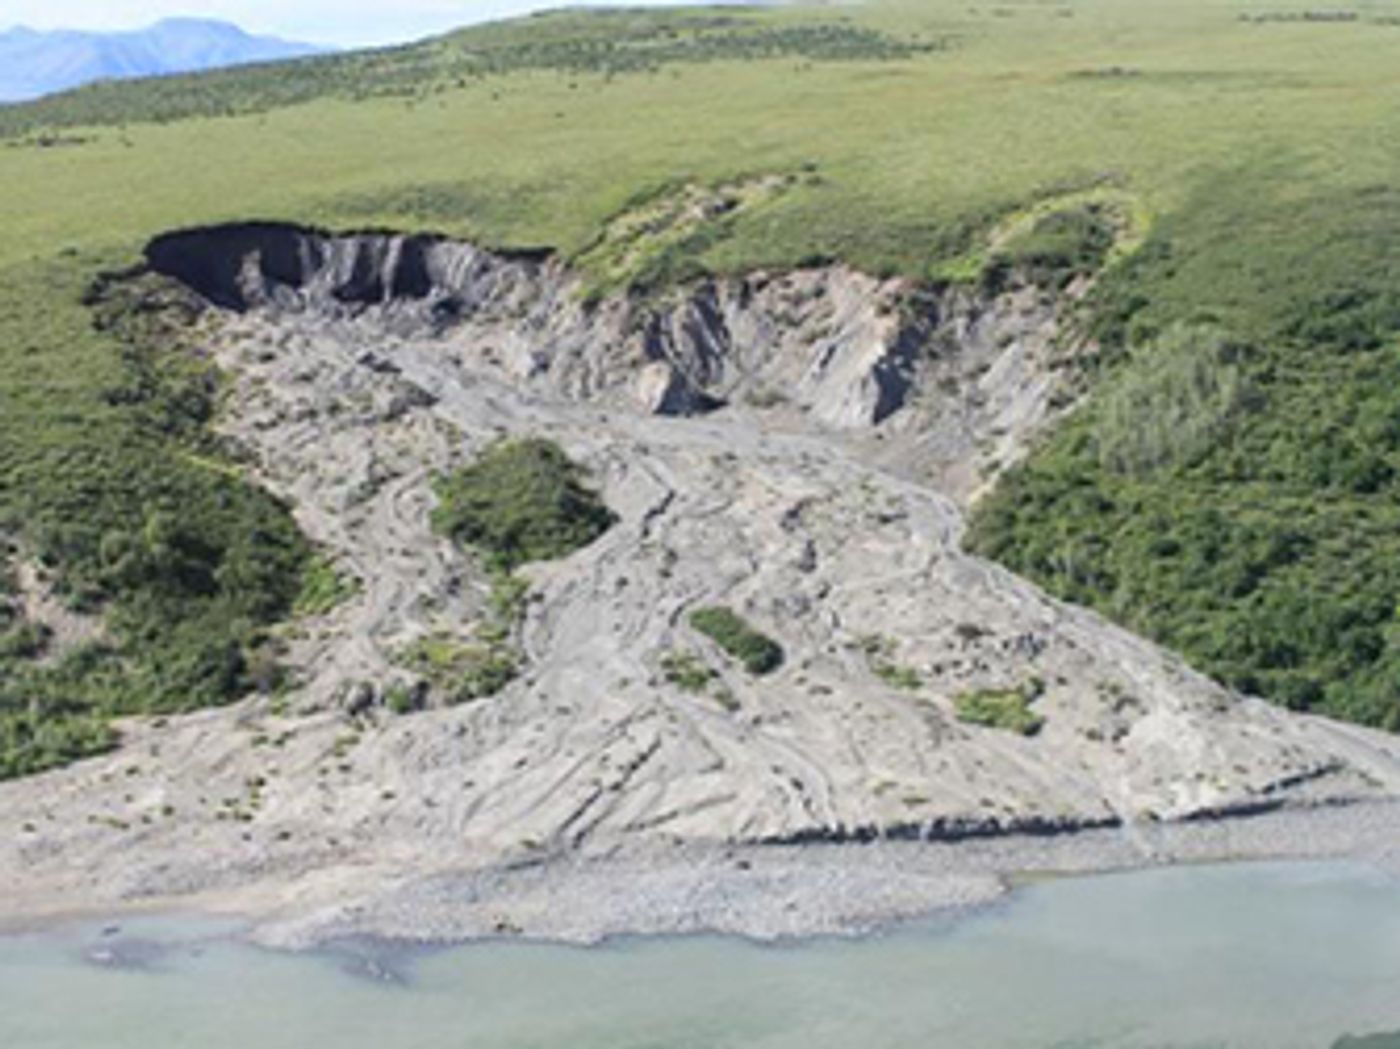 A retrogressive thaw slump where the top layer of usually frozen soil has melted and slid into the river below. / Credit: NPS Photo.